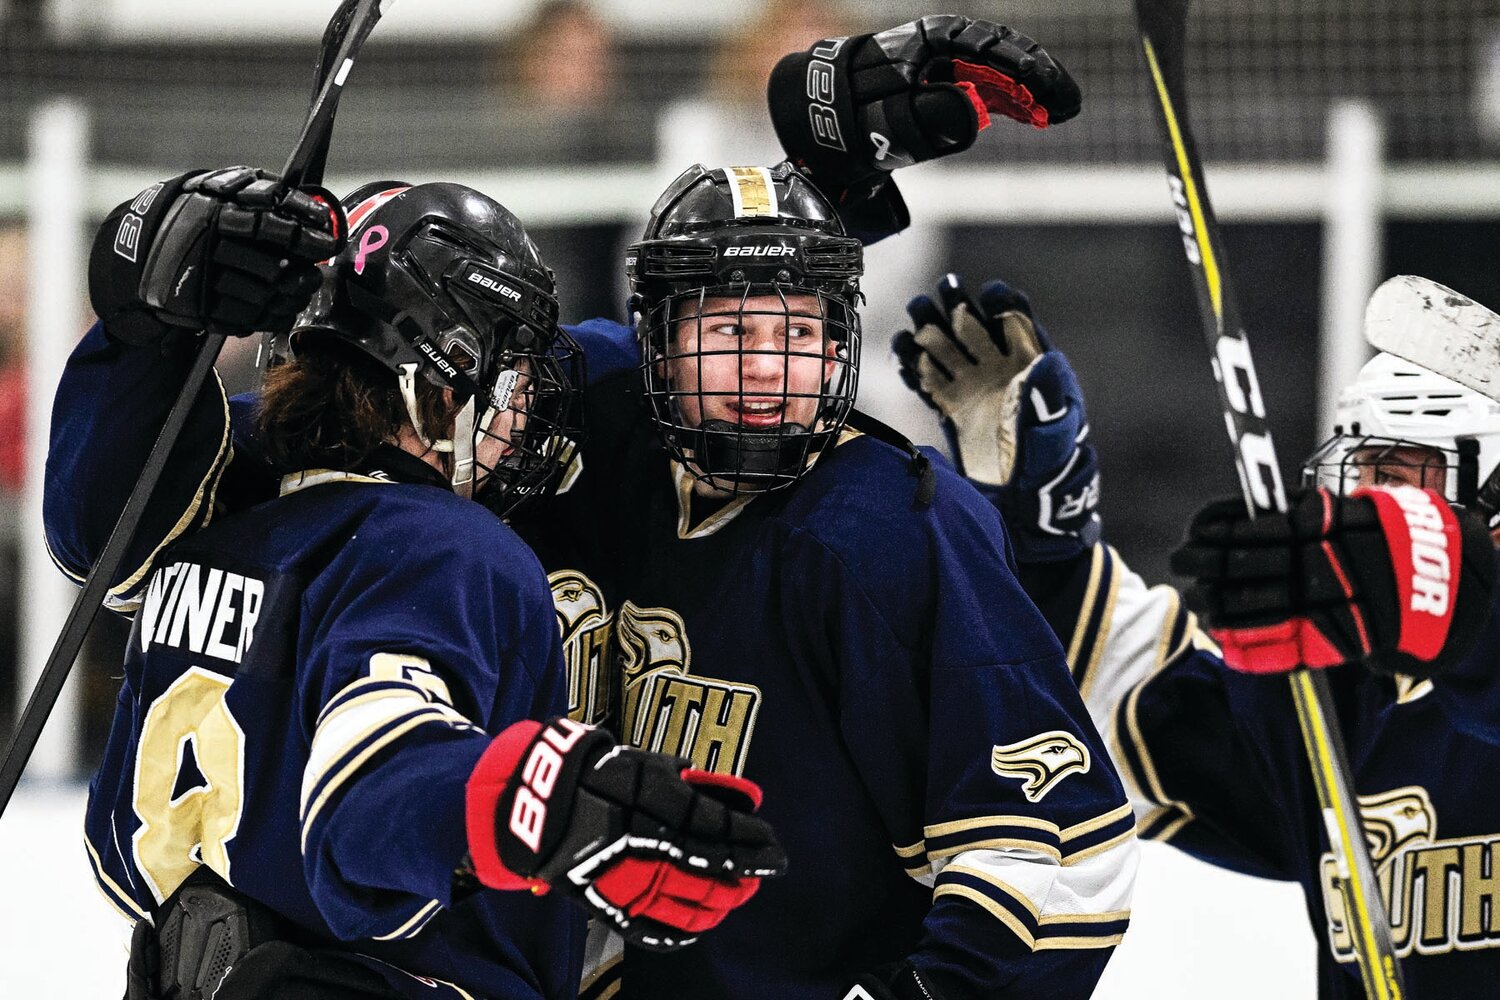 Council Rock South’s Jake Maurer celebrates a second period goal by Kevin Koles with Jake Weiner, making the score 3-2.